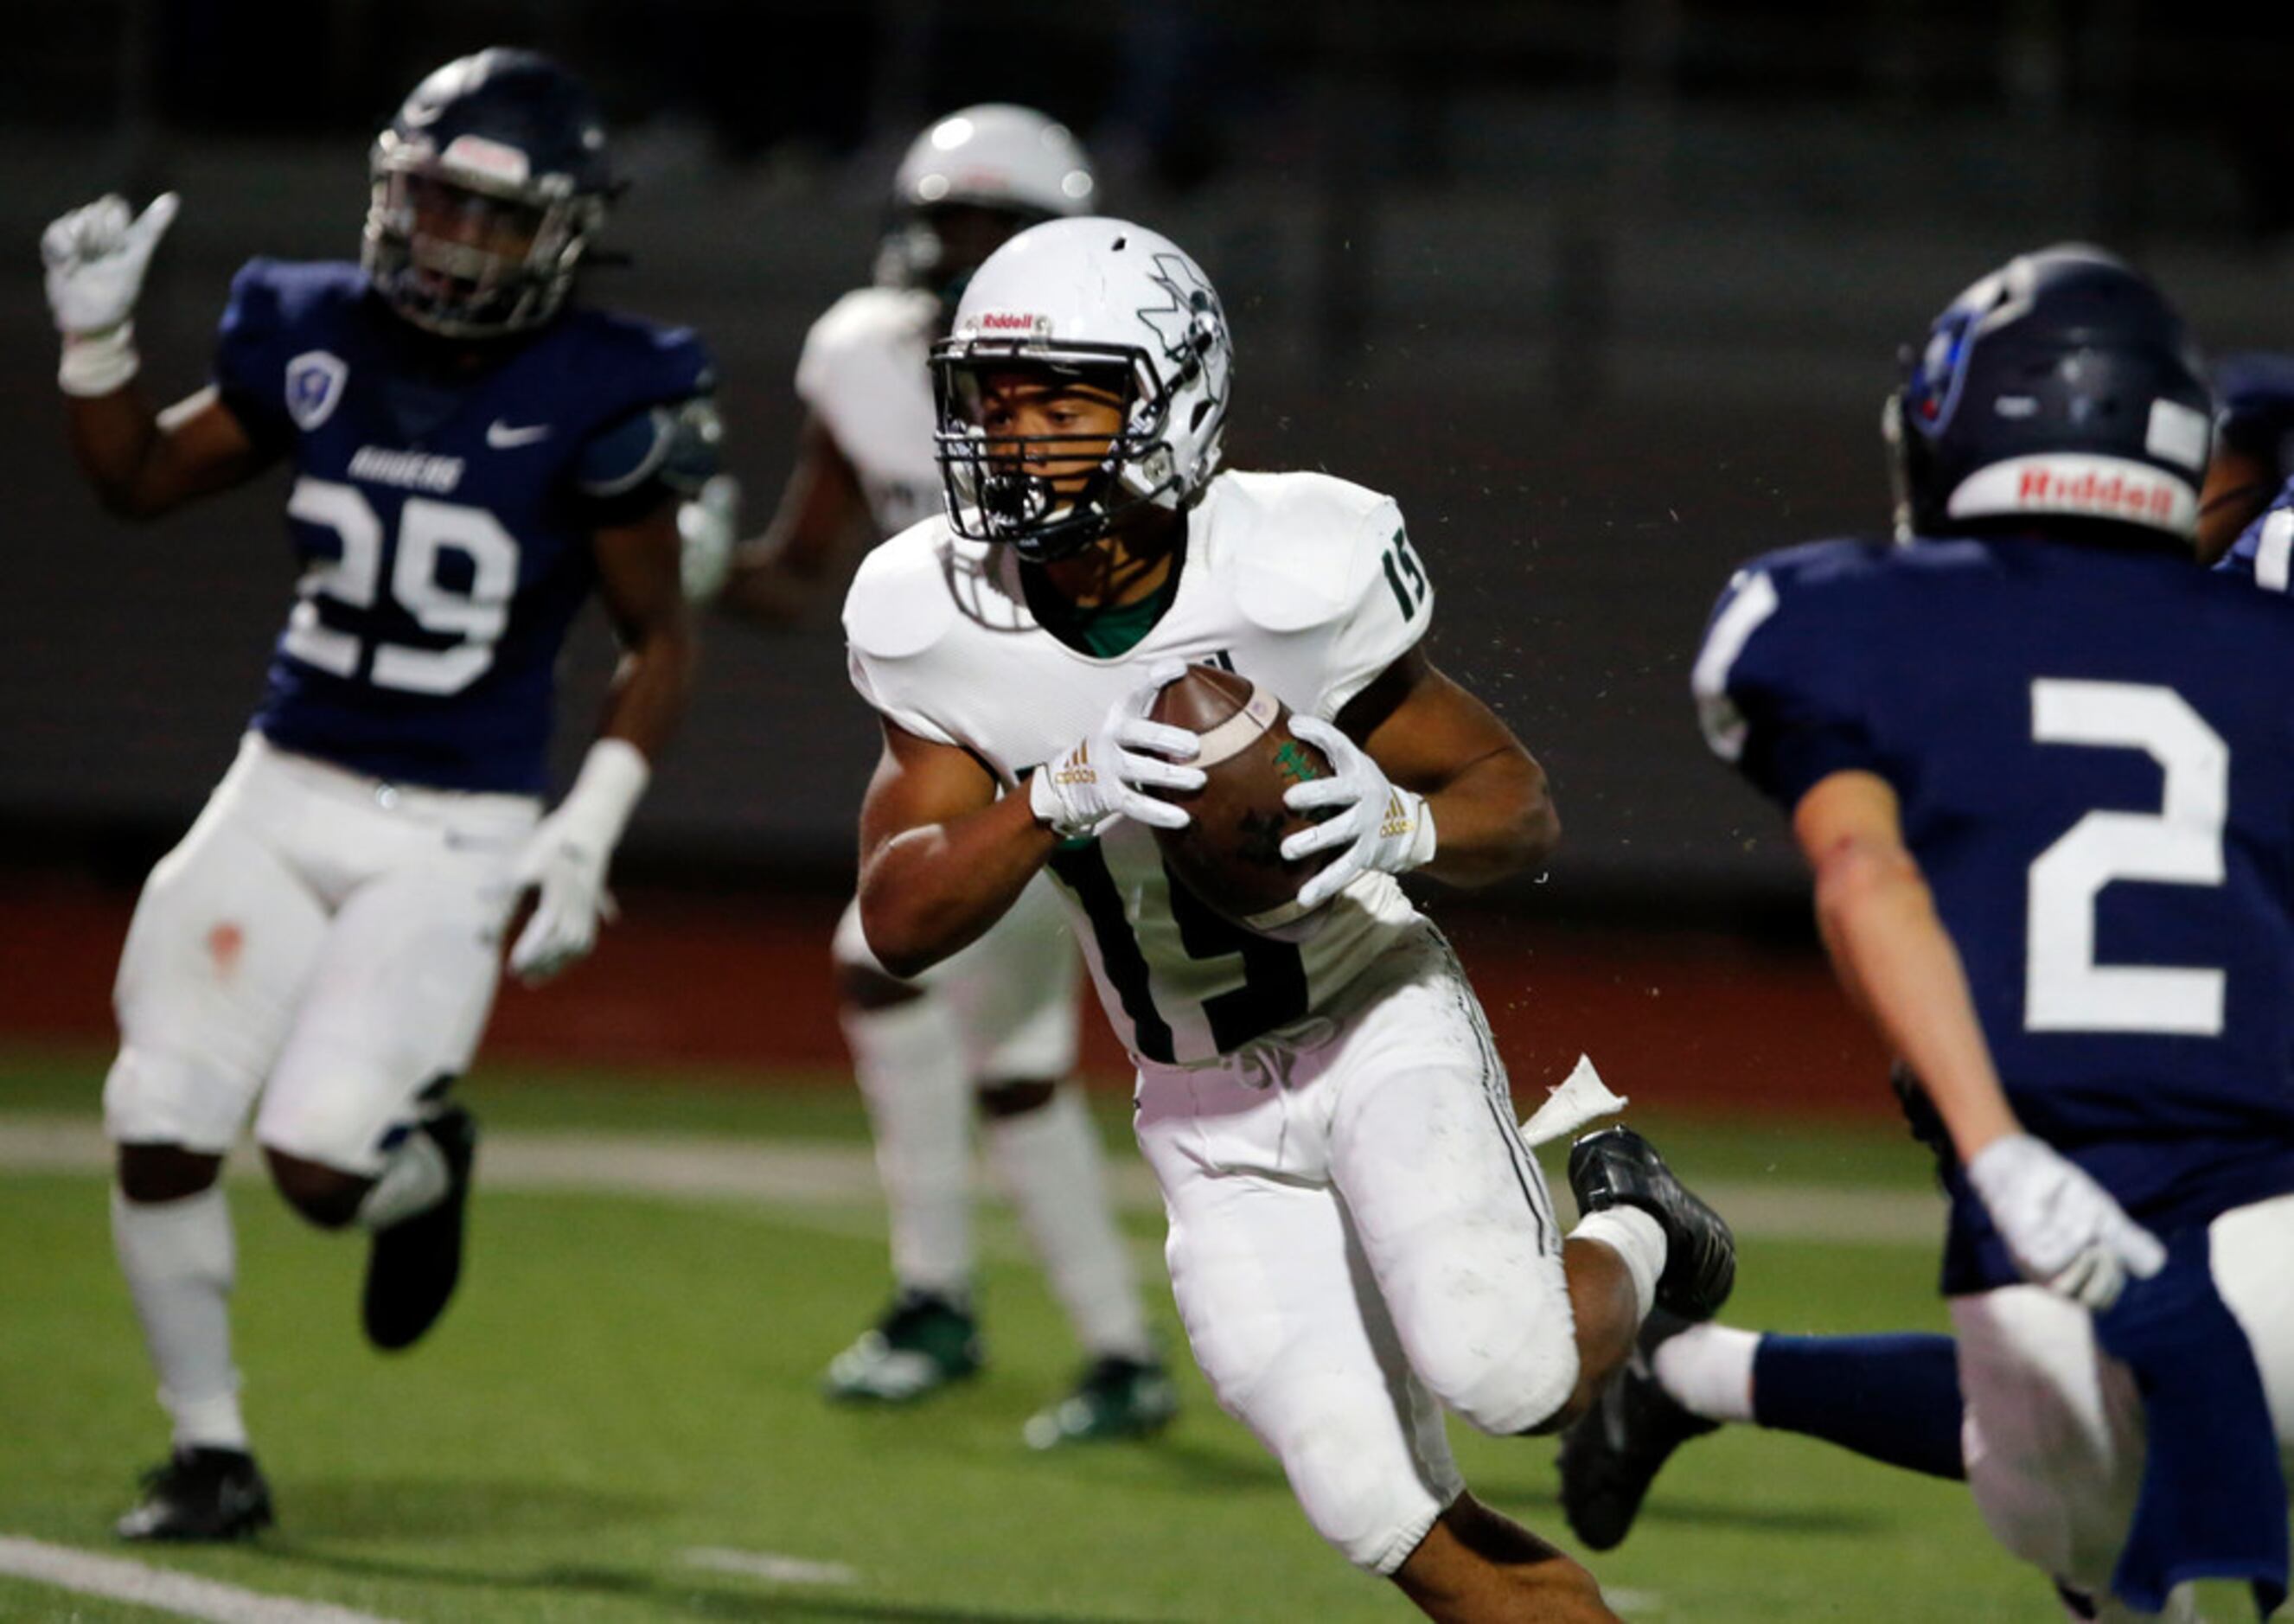 Mesquite Poteet's Xzaveon Jeans (15) cuts through the The Wylie East defense for a touchdown...